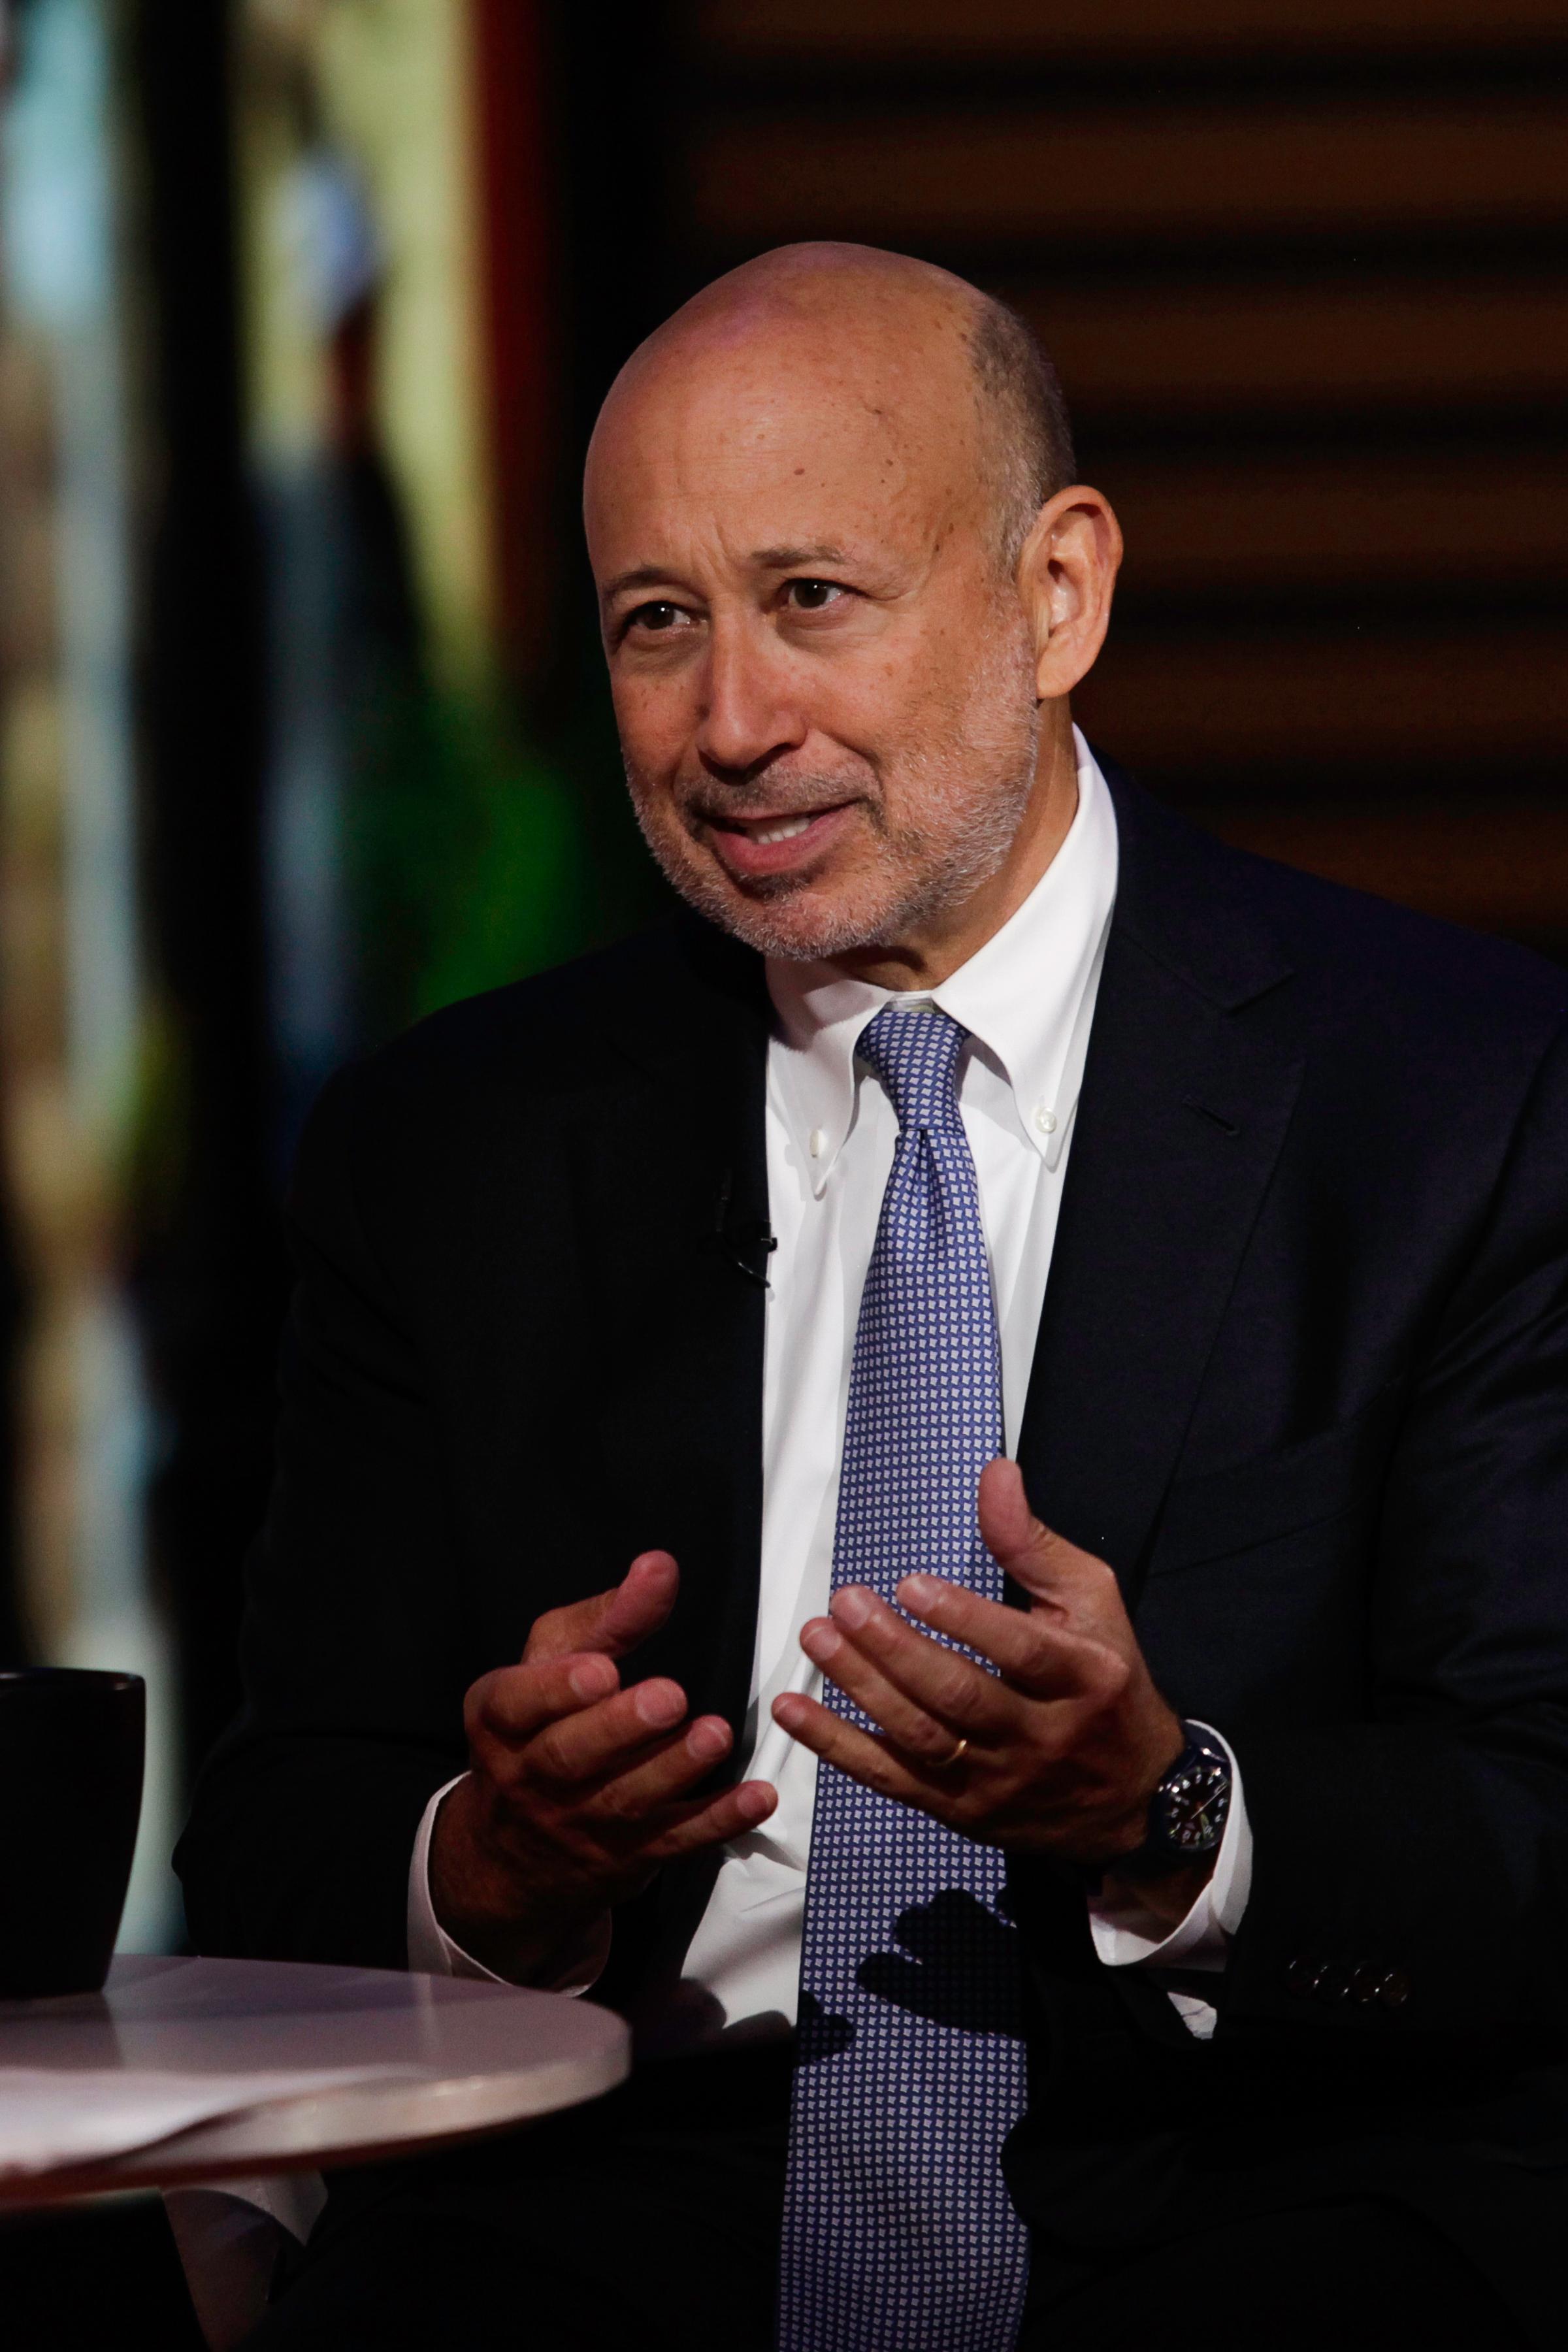 Lloyd Blankfein, CEO of Goldman Sachs Group, at a TV interview in New York City on July 29, 2015.